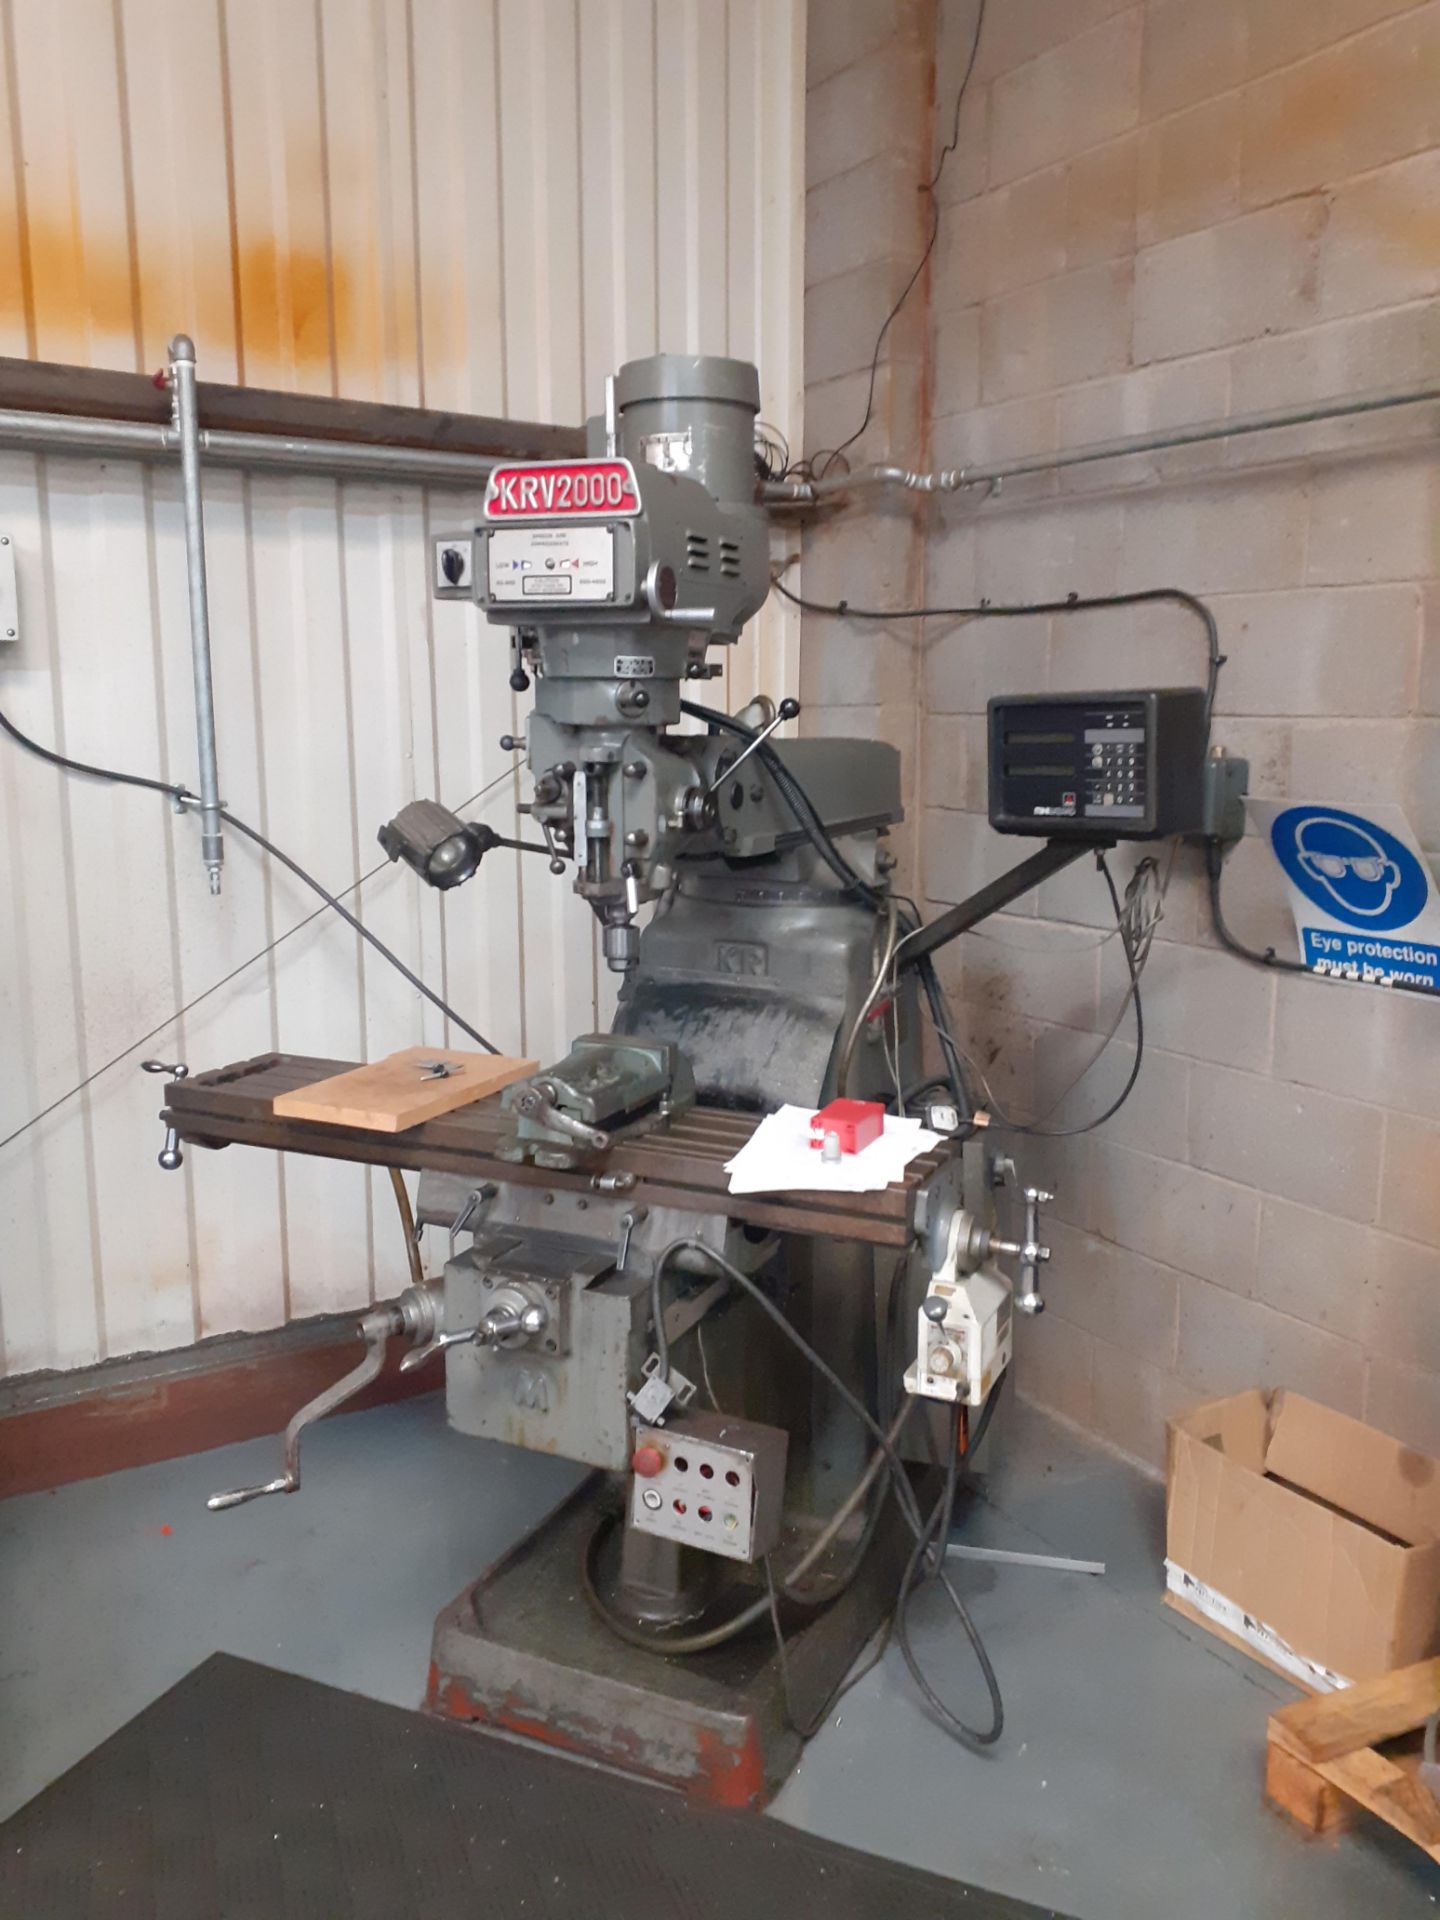 KRV2000 Vertical Milling Machine Serial Number – (1999) with Anilam Mini Wizard X-Y Dro